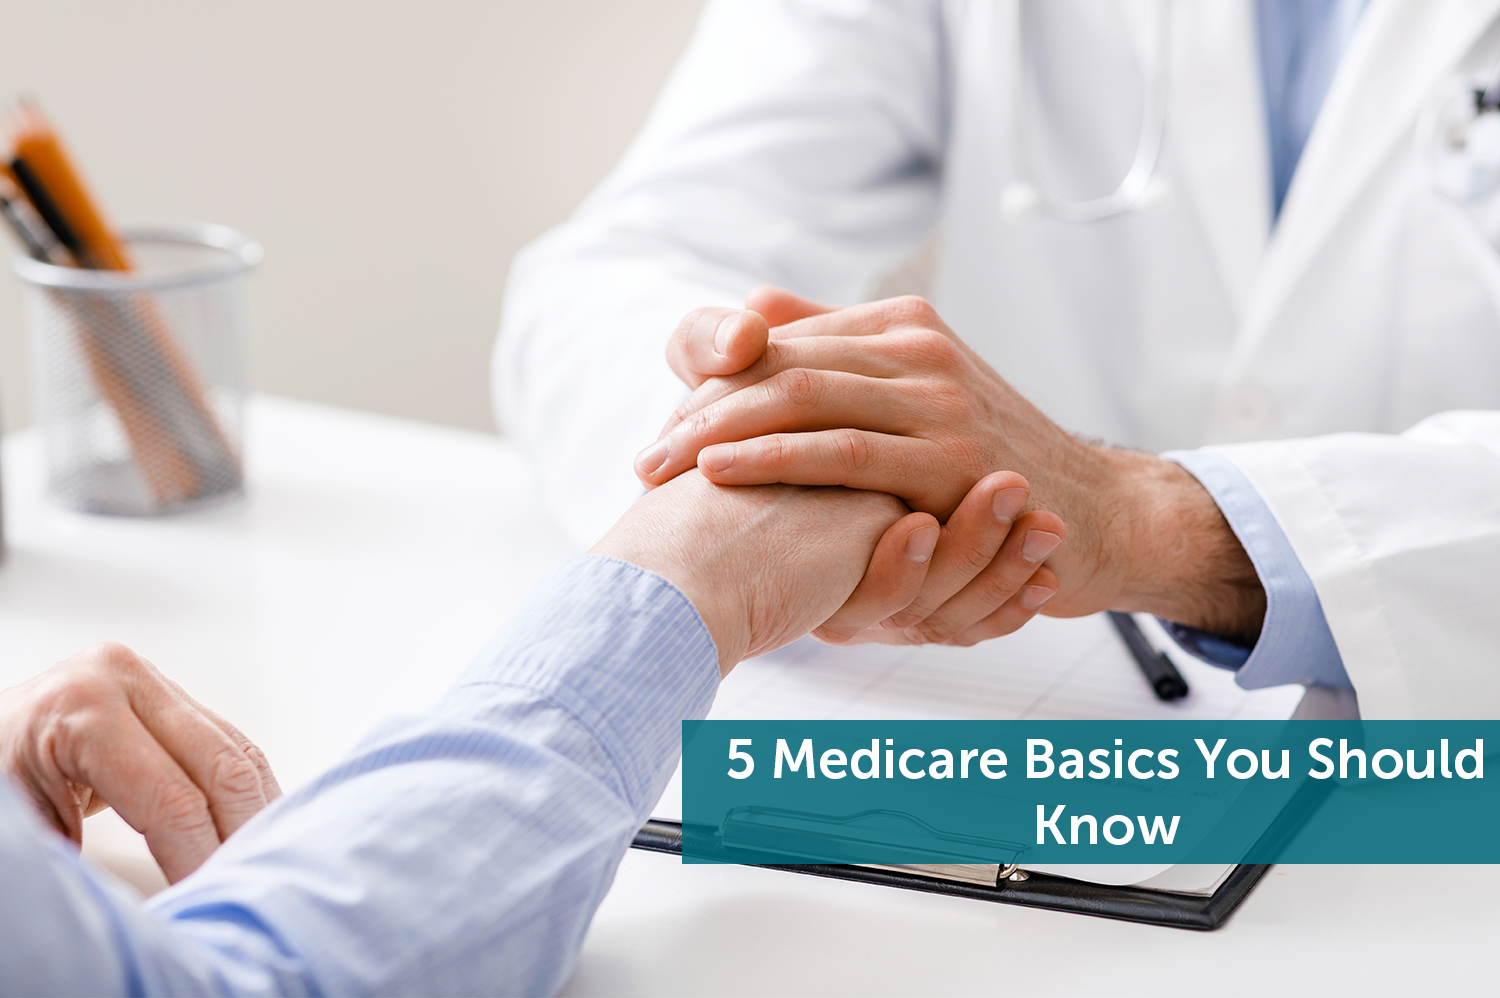 Doctor going over Medicare basics in office while holding his hand.